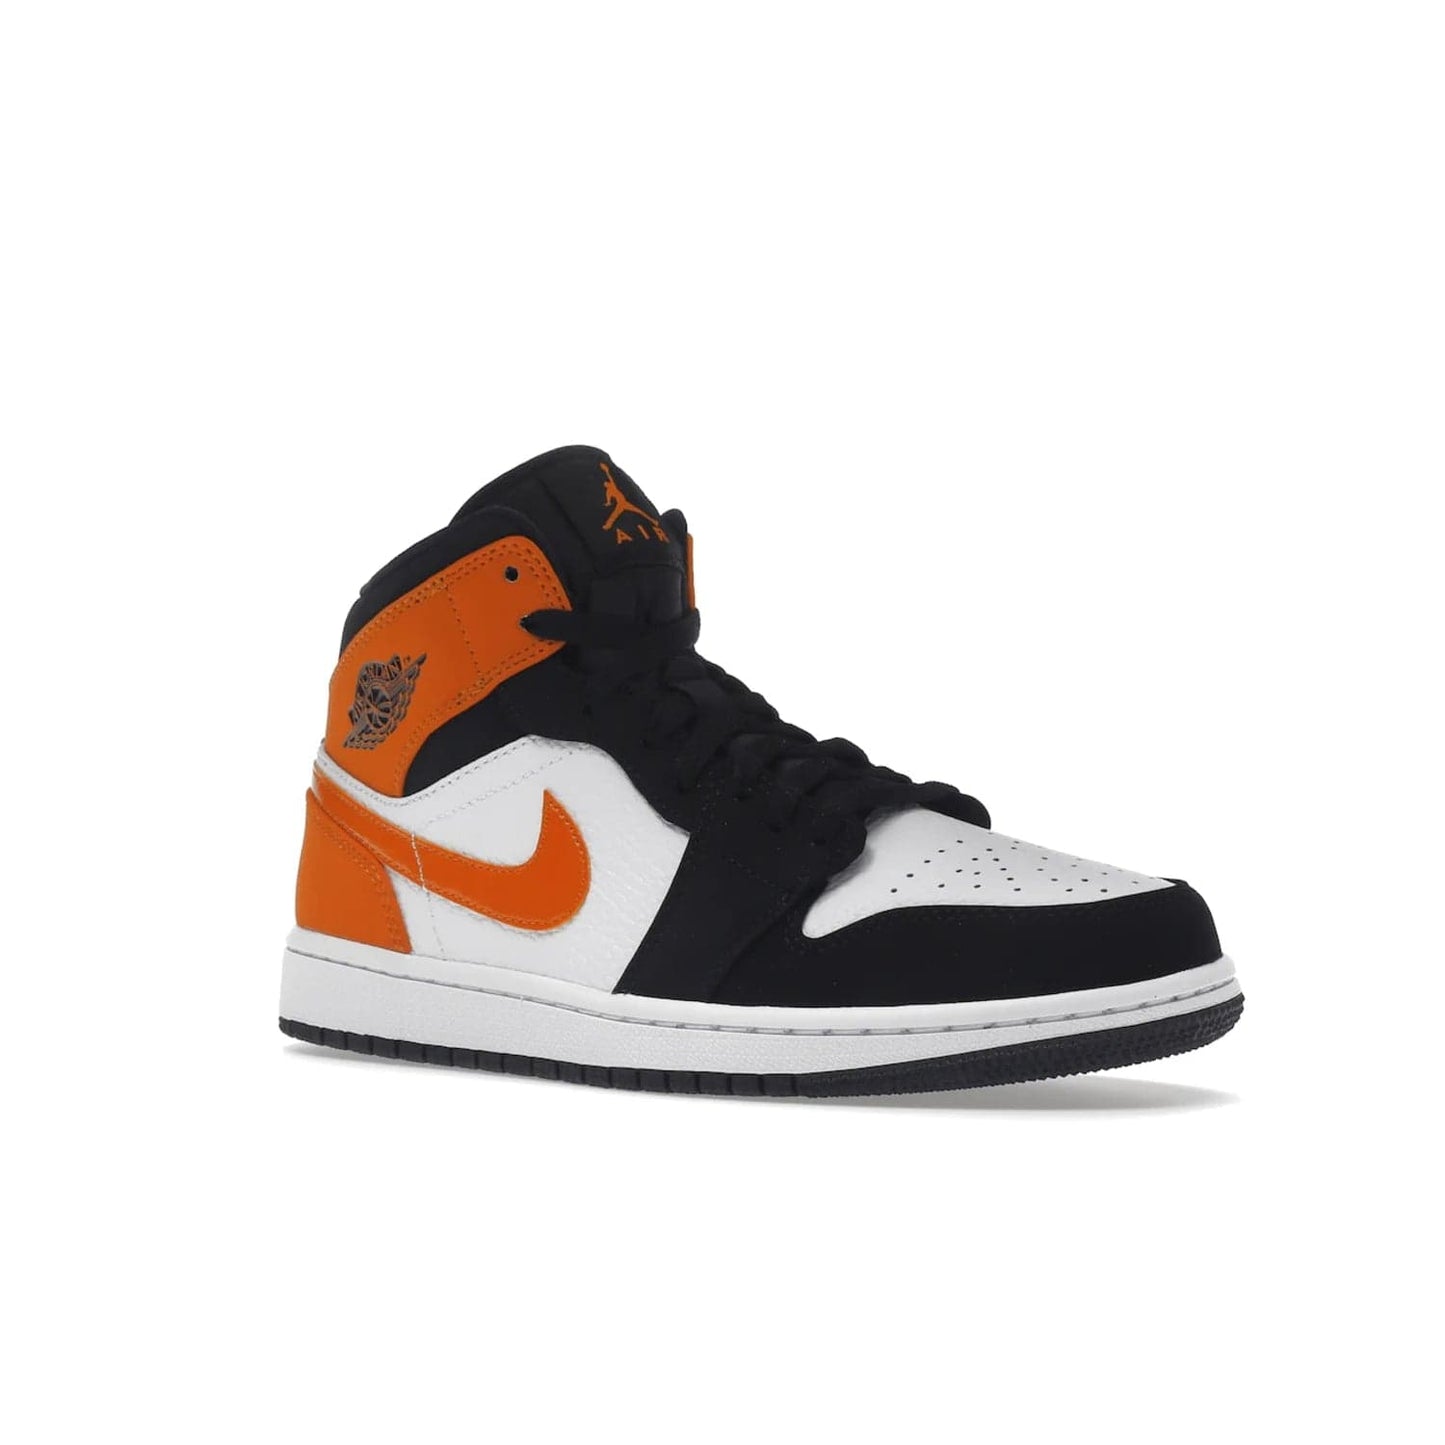 Jordan 1 Mid Shattered Backboard - Image 5 - Only at www.BallersClubKickz.com - The Air Jordan 1 Mid Shattered Backboard offers a timeless Black/White-Starfish colorway. Classic Swoosh logo and AJ insignia plus a shatterd backboard graphic on the insole. Get your pair today!